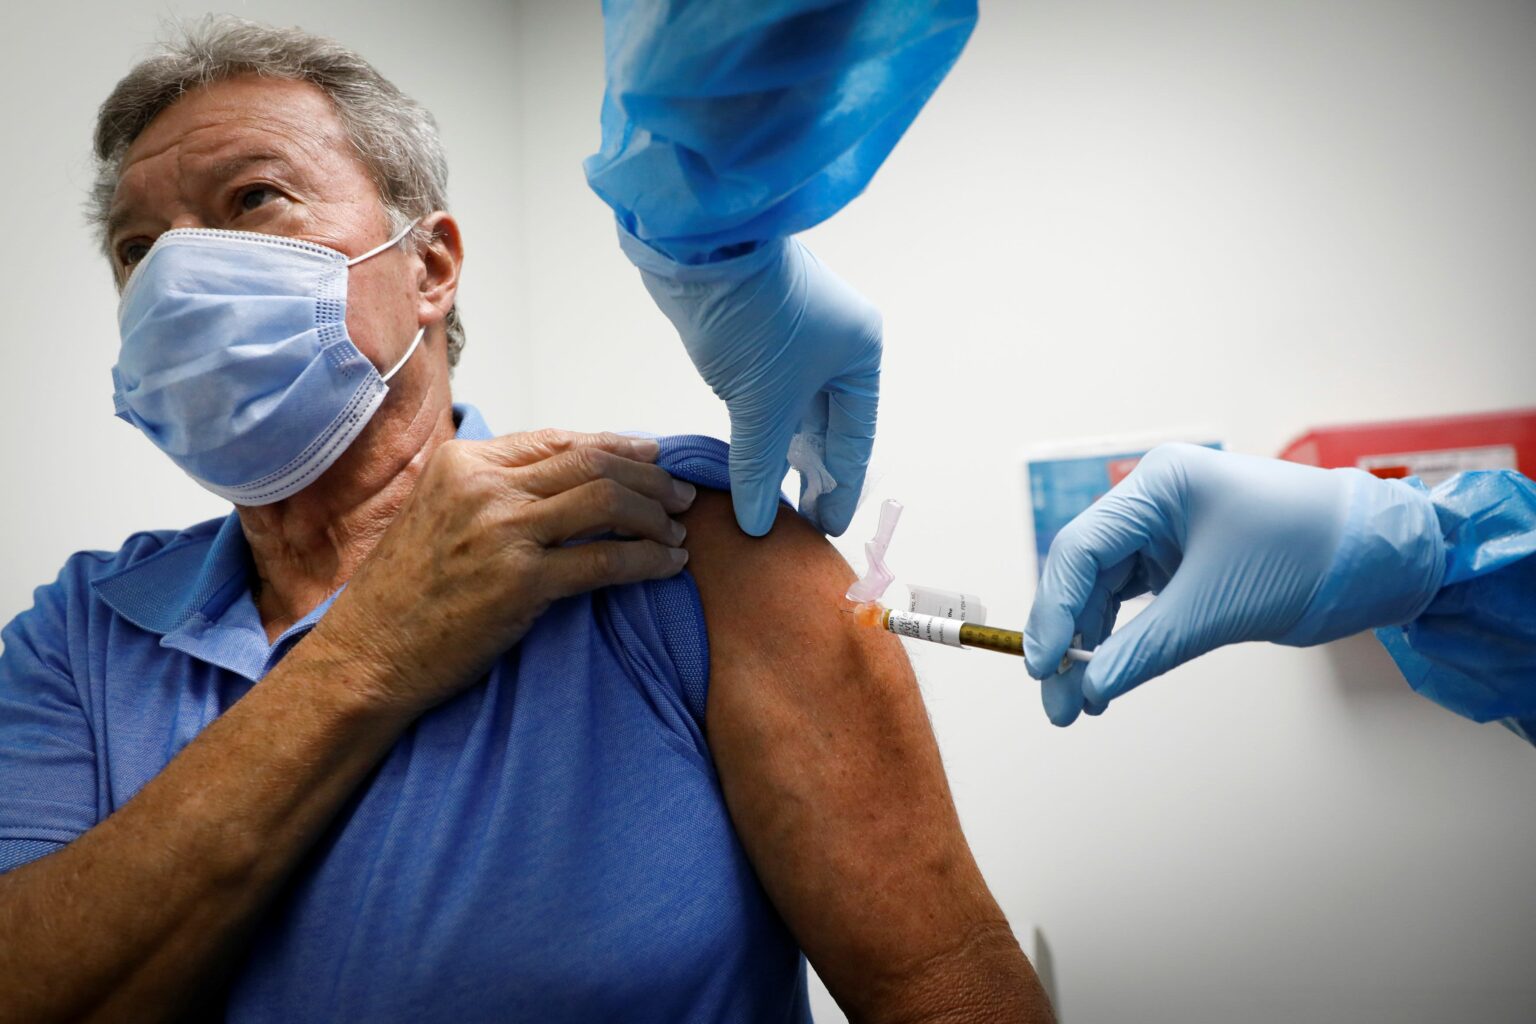 Image of someone getting the Vaccine 